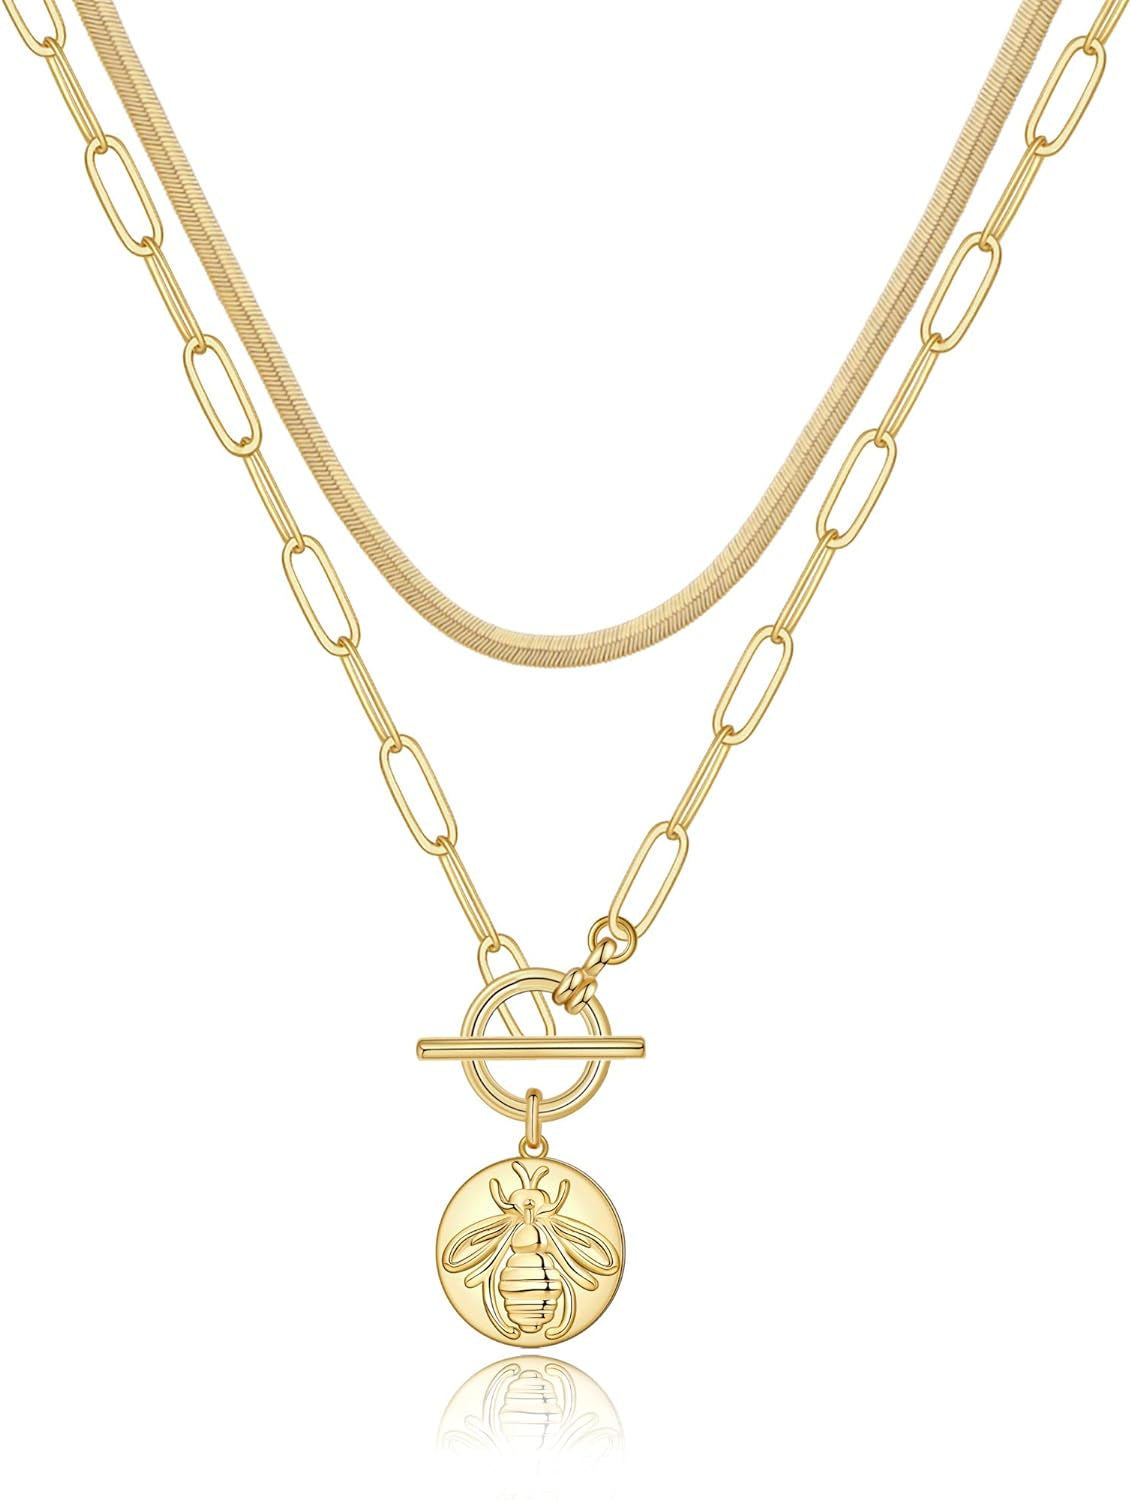 Gold Layered Necklaces for Women, 14K Gold Plated Vintage Evil Eye Queen Elizabeth Bee Sun and Moon Medallion Necklace Retro Choker Chain Link Necklace Gold Layered Necklaces for Women Girls Jewelry